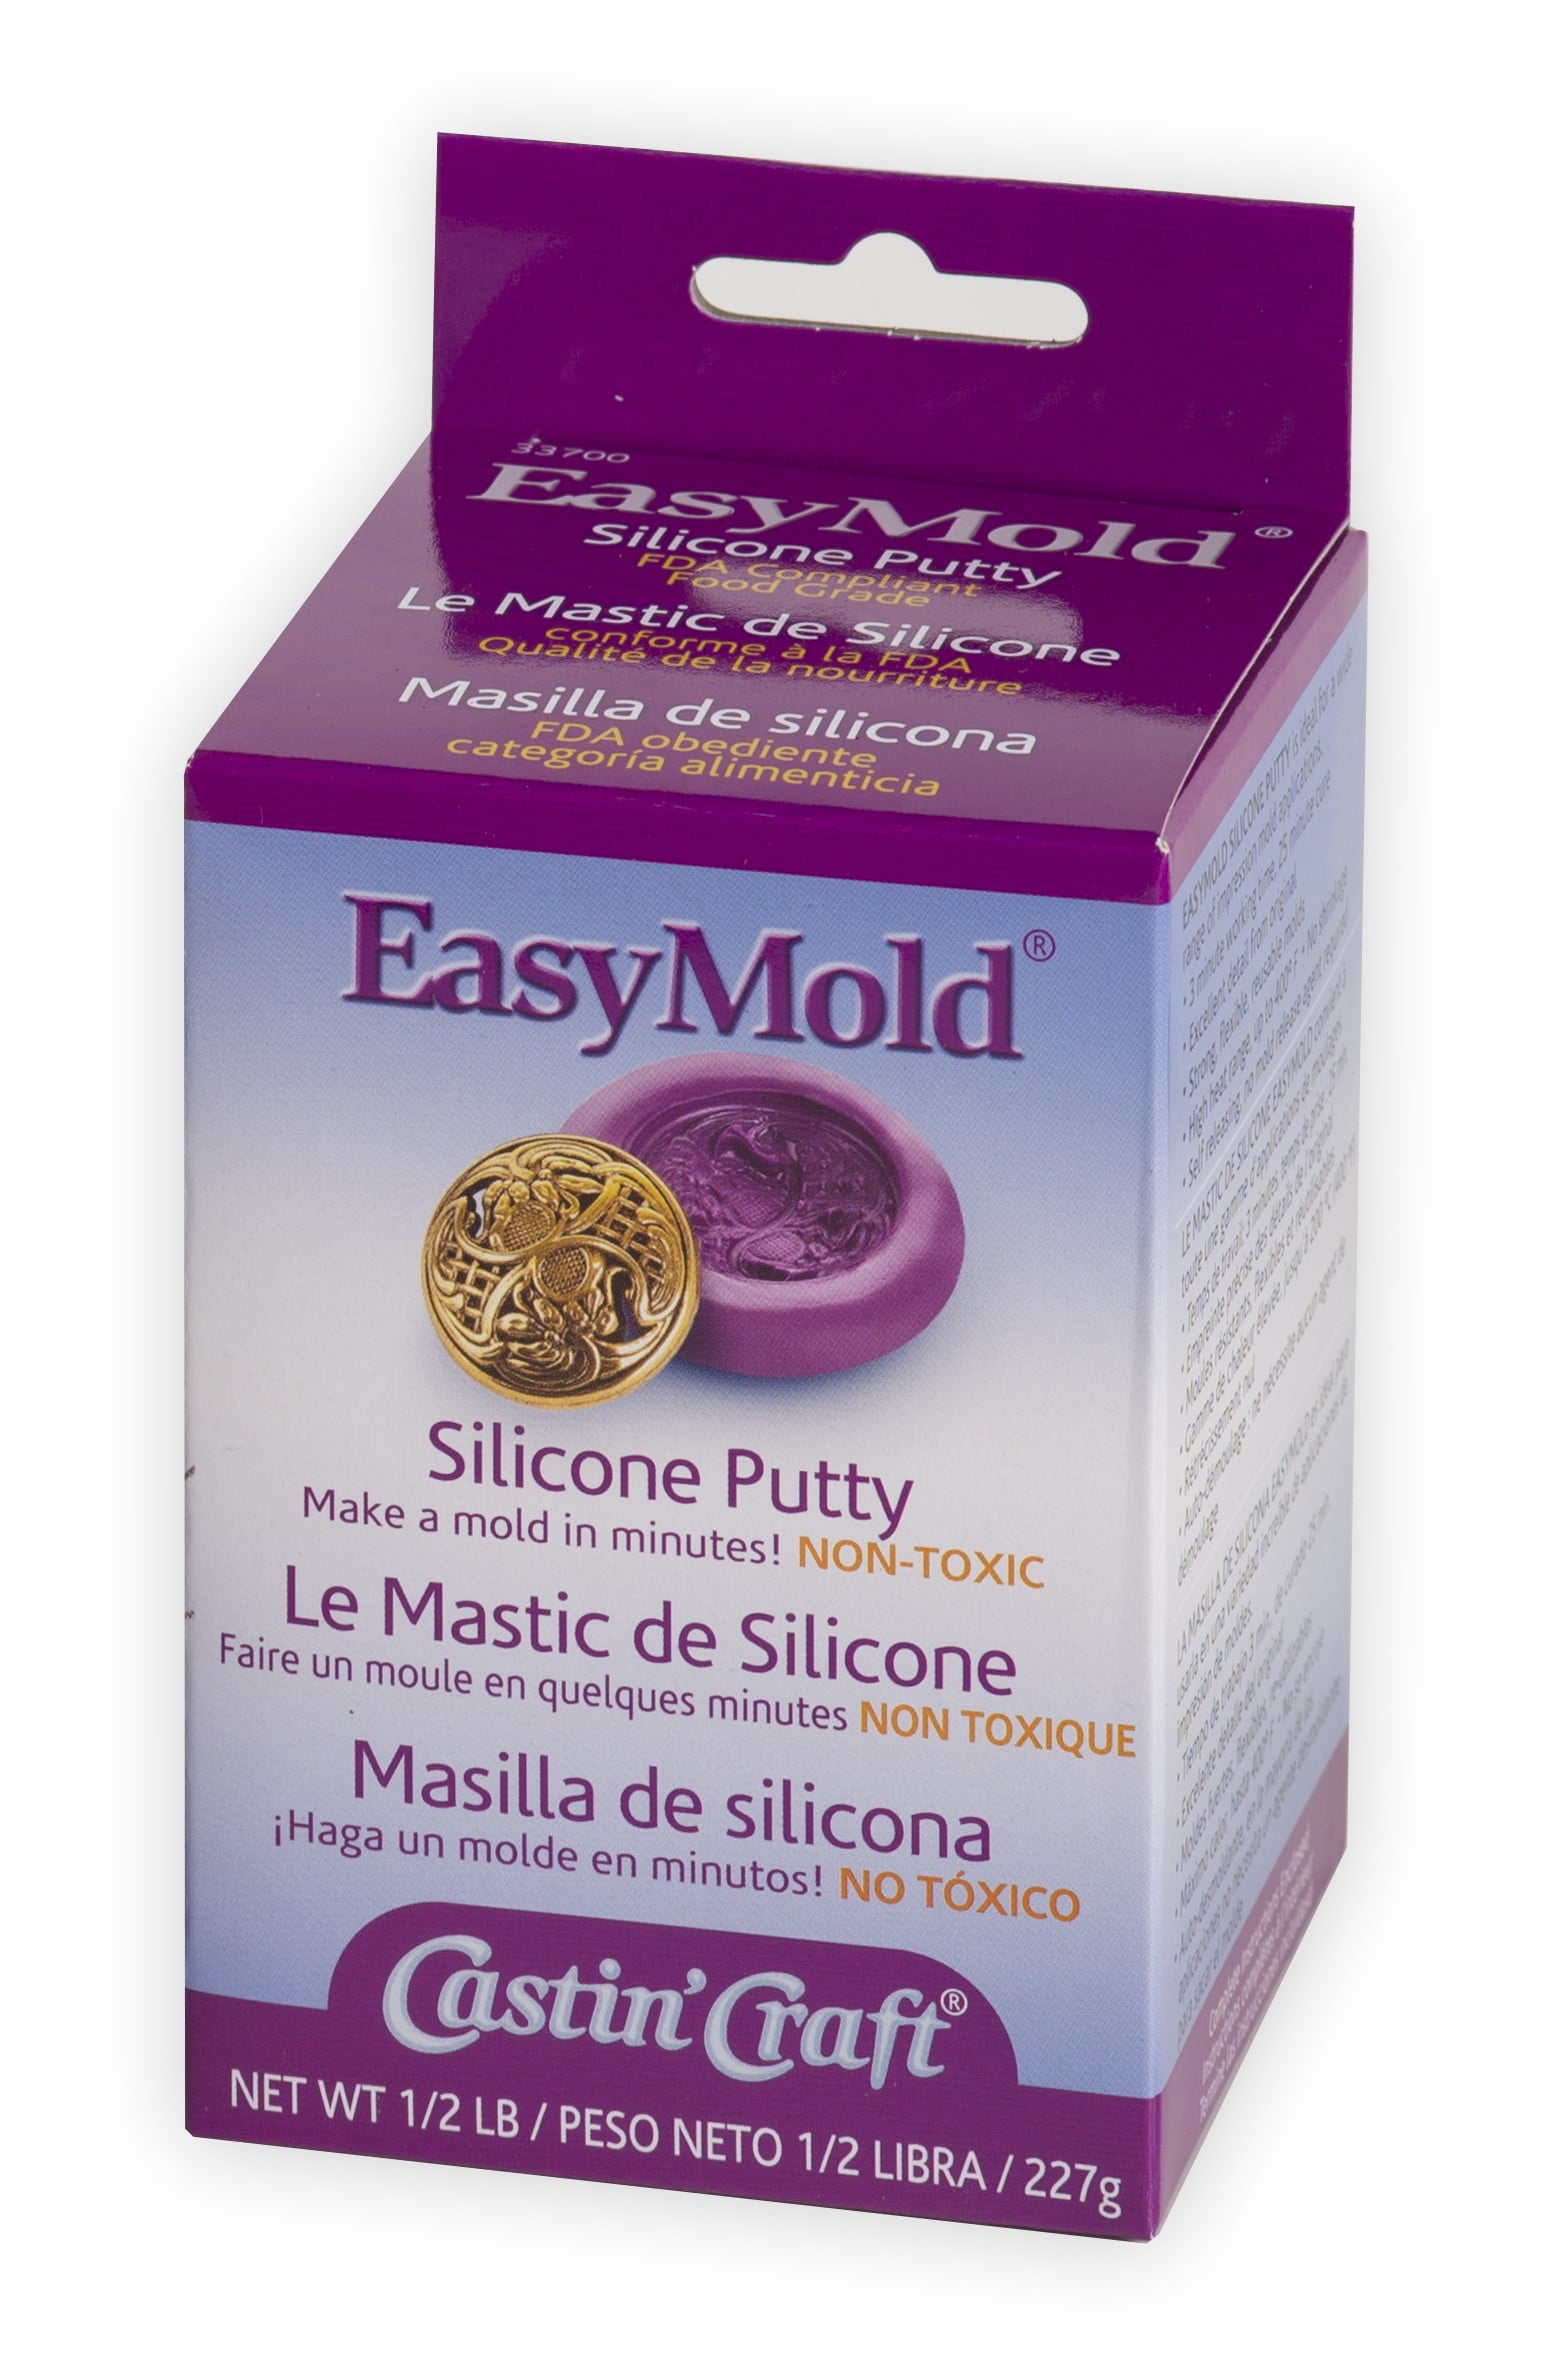 Smooth-On Equinox Slow Silicone Putty Kit - 16 oz.